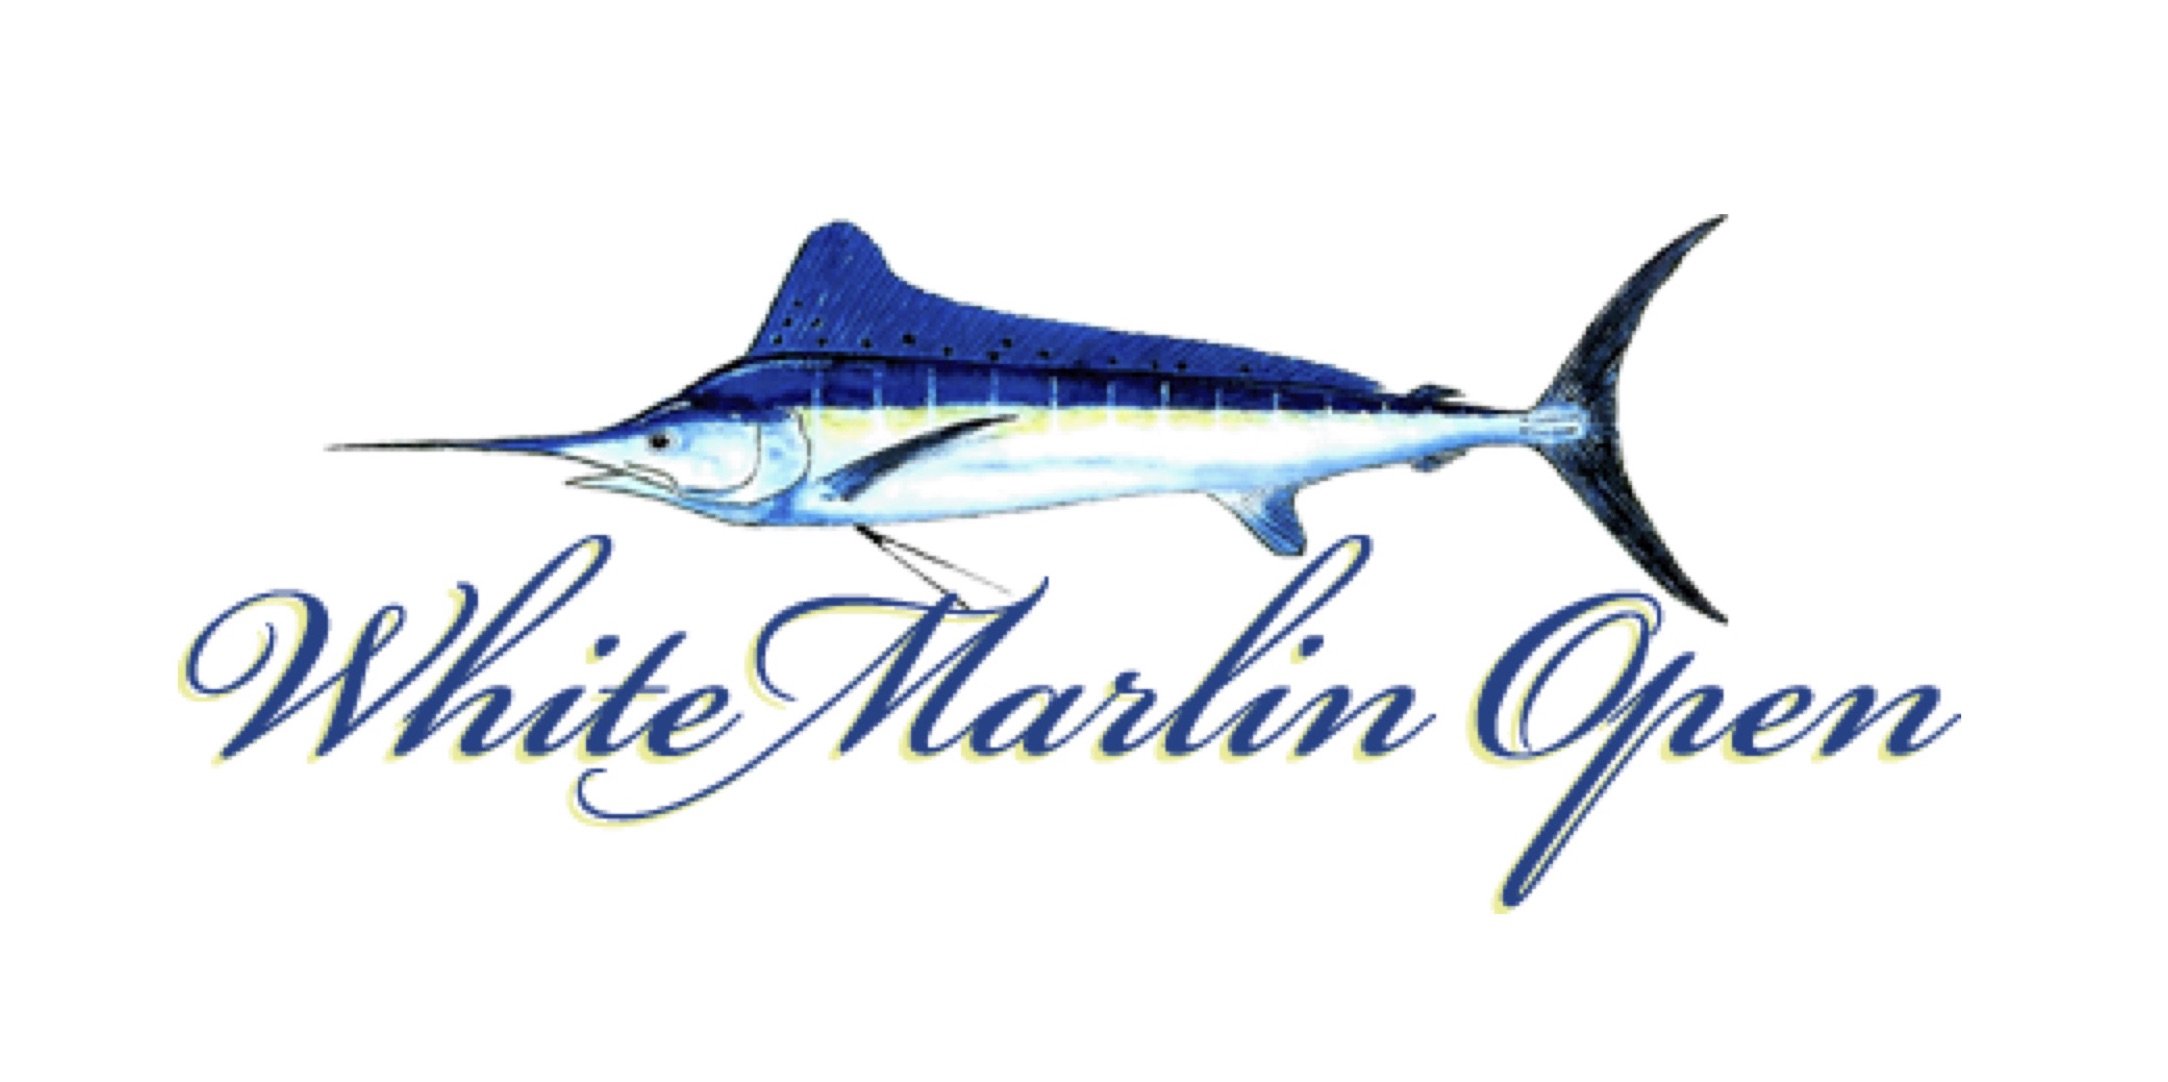 The 43rd Annual White Marlin Open